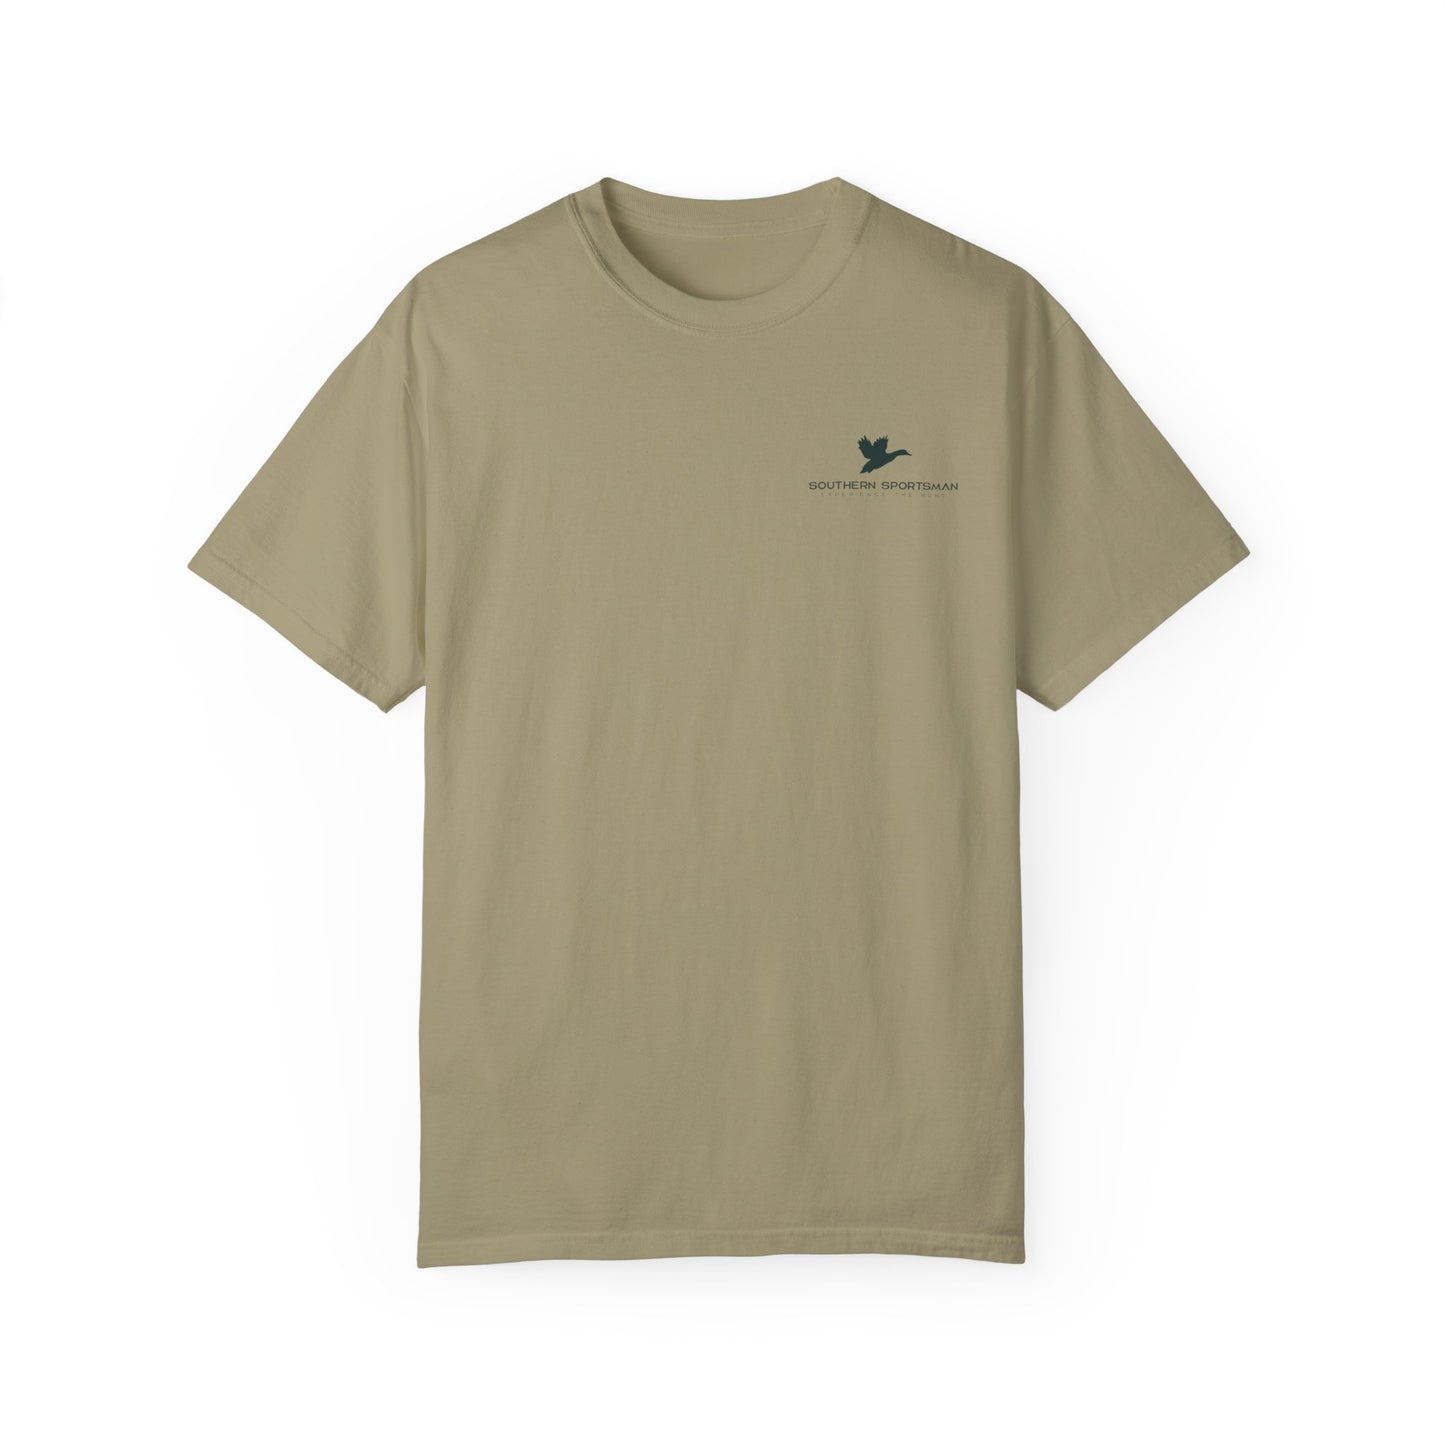 Wild Round Flush T-Shirt in Comfort Colors